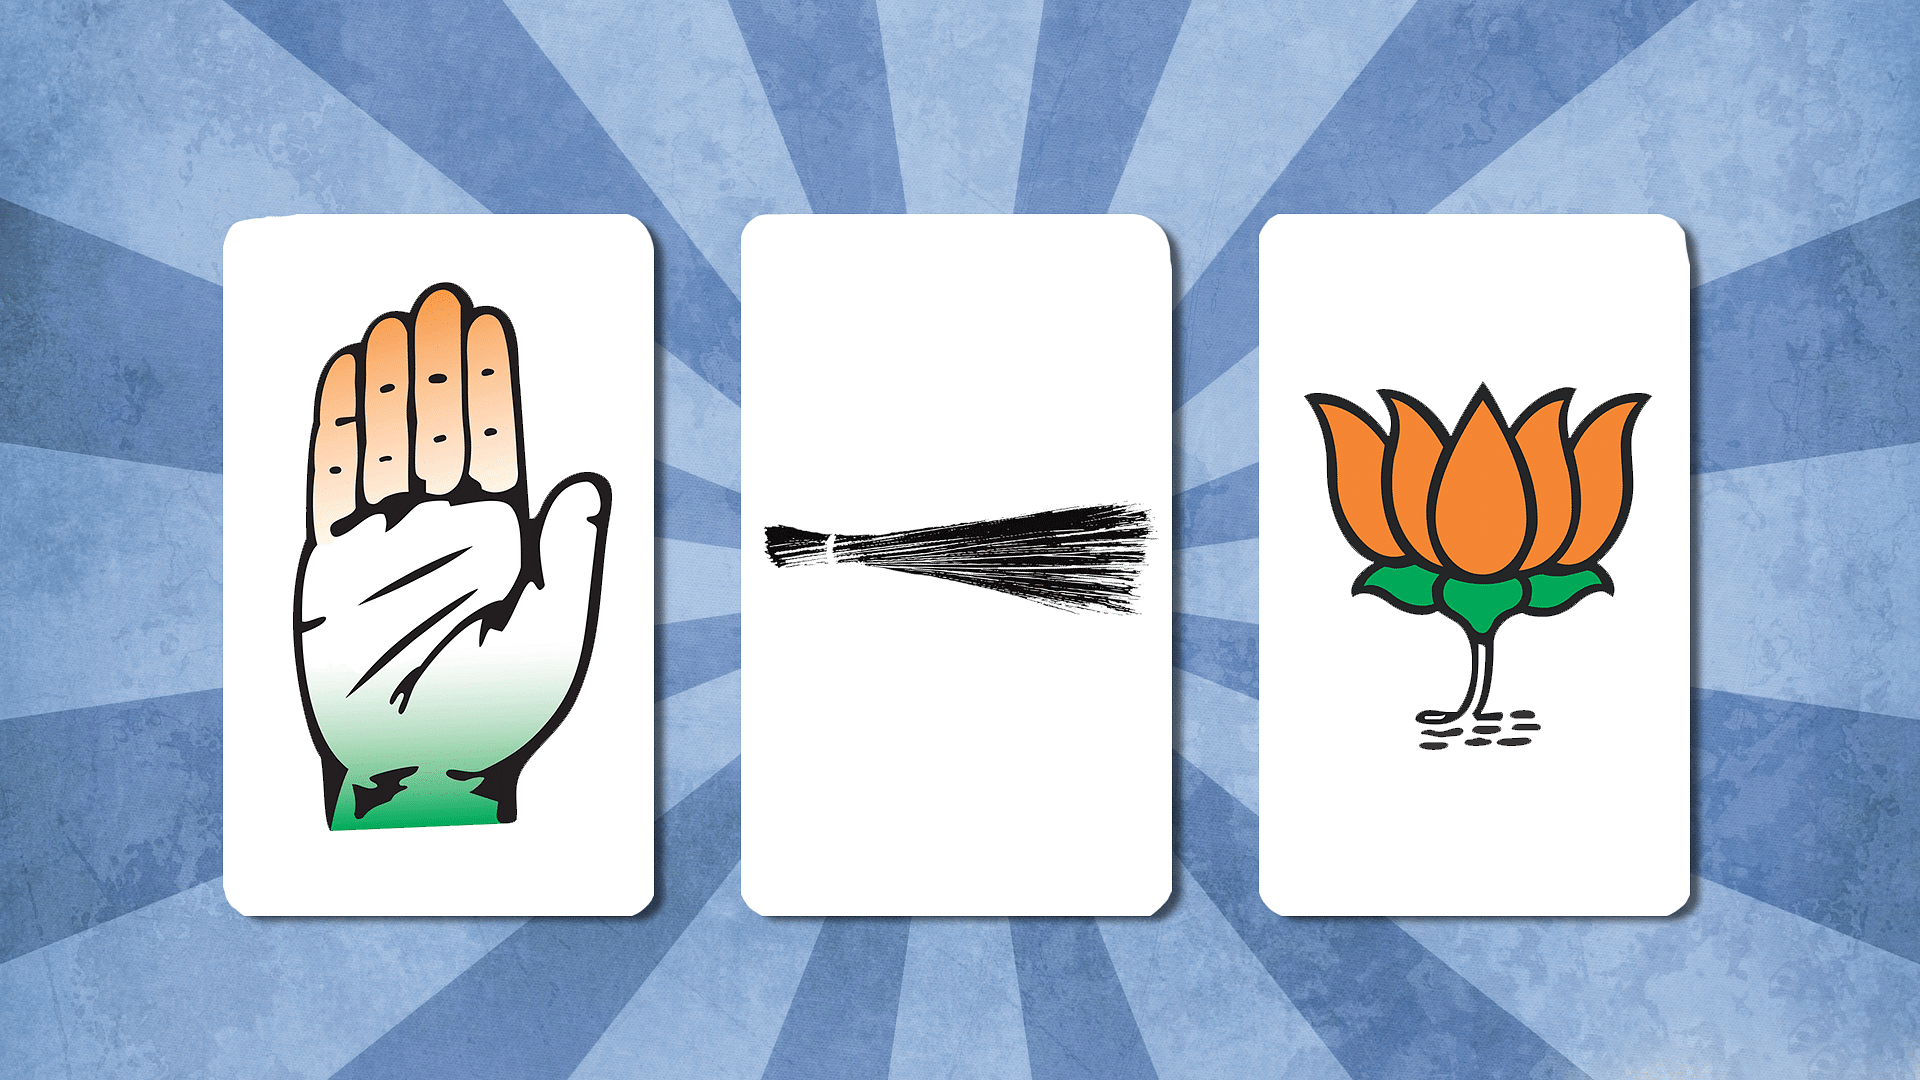 It’s a three-way fight between the AAP, the BJP and the Congress. (Photo: <b>The Quint</b>)